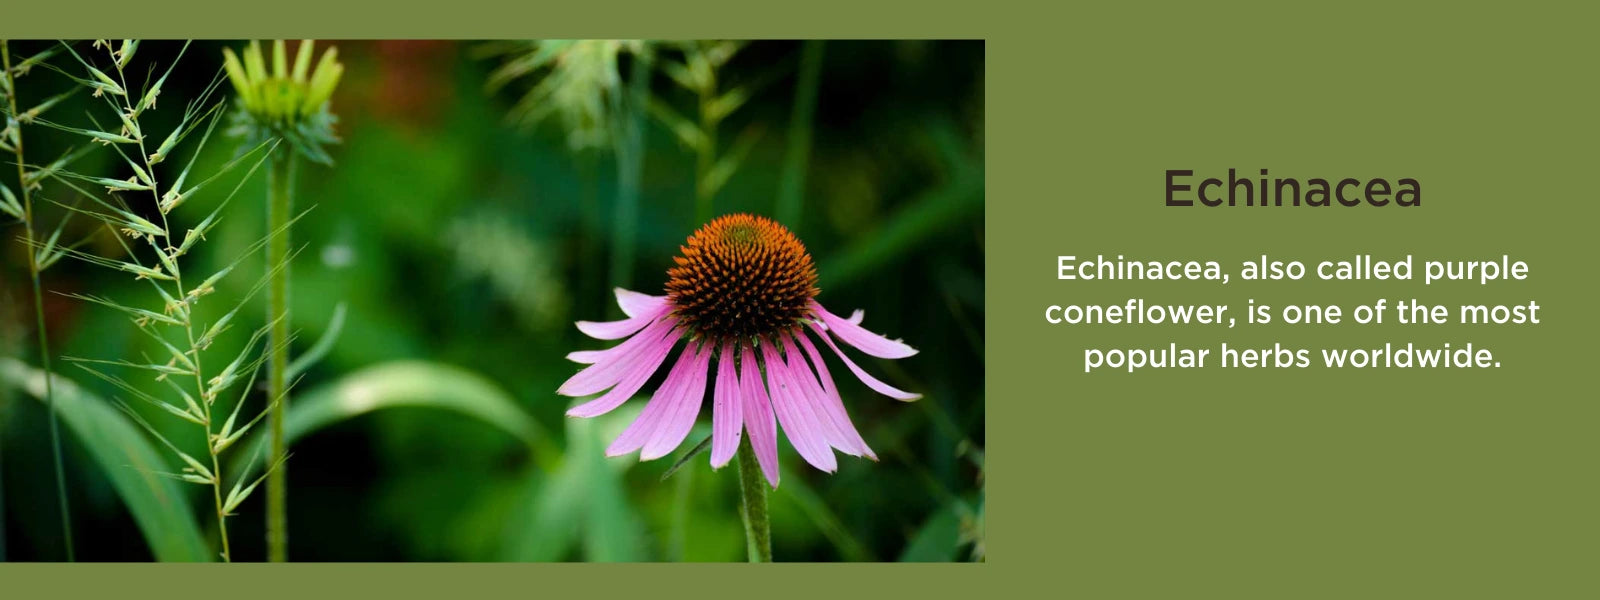 Echinacea - Health Benefits, Uses and Important Facts